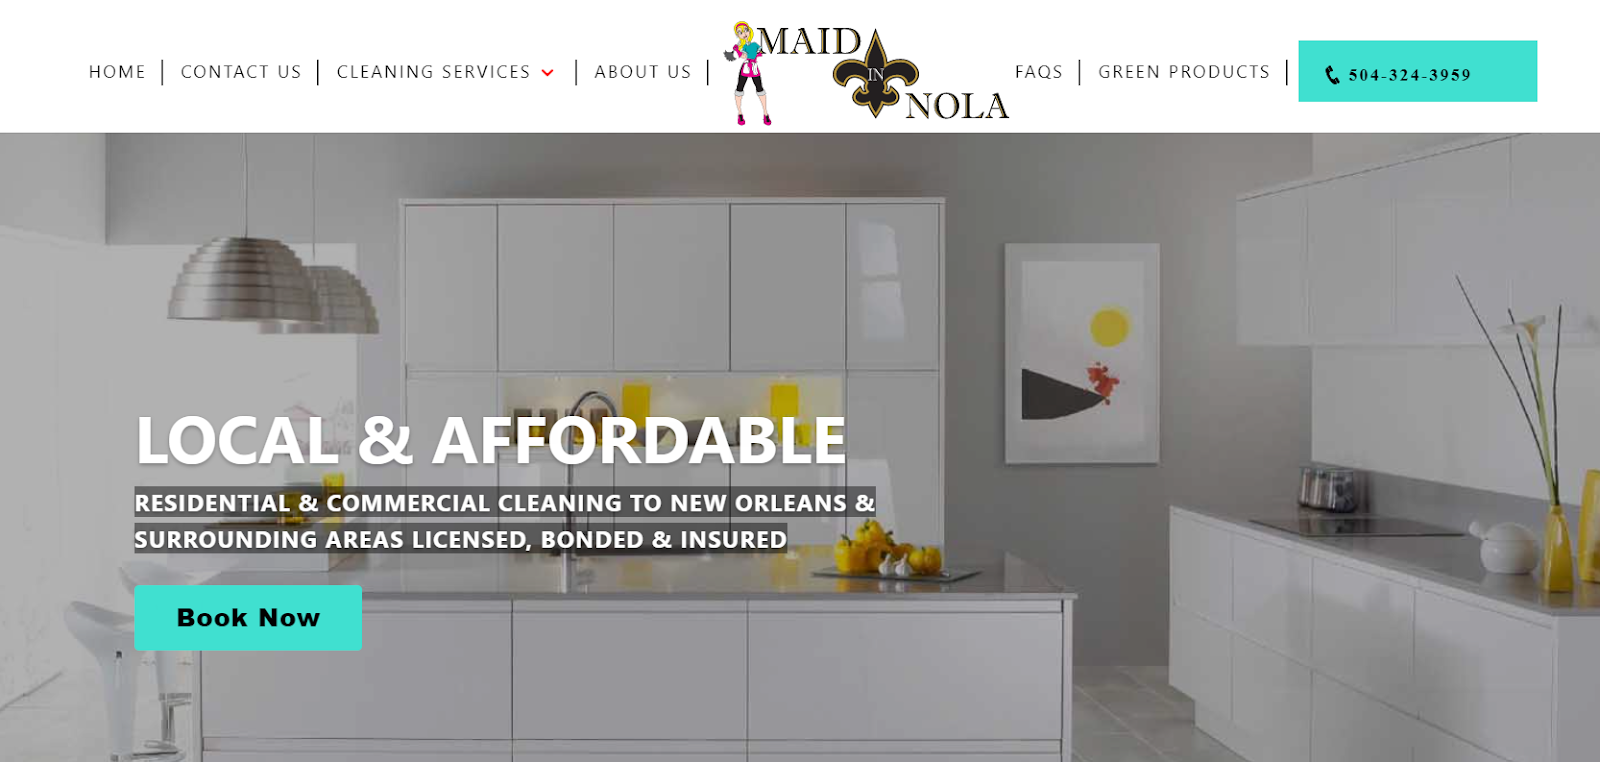 cleaning company website, Maid in Nola